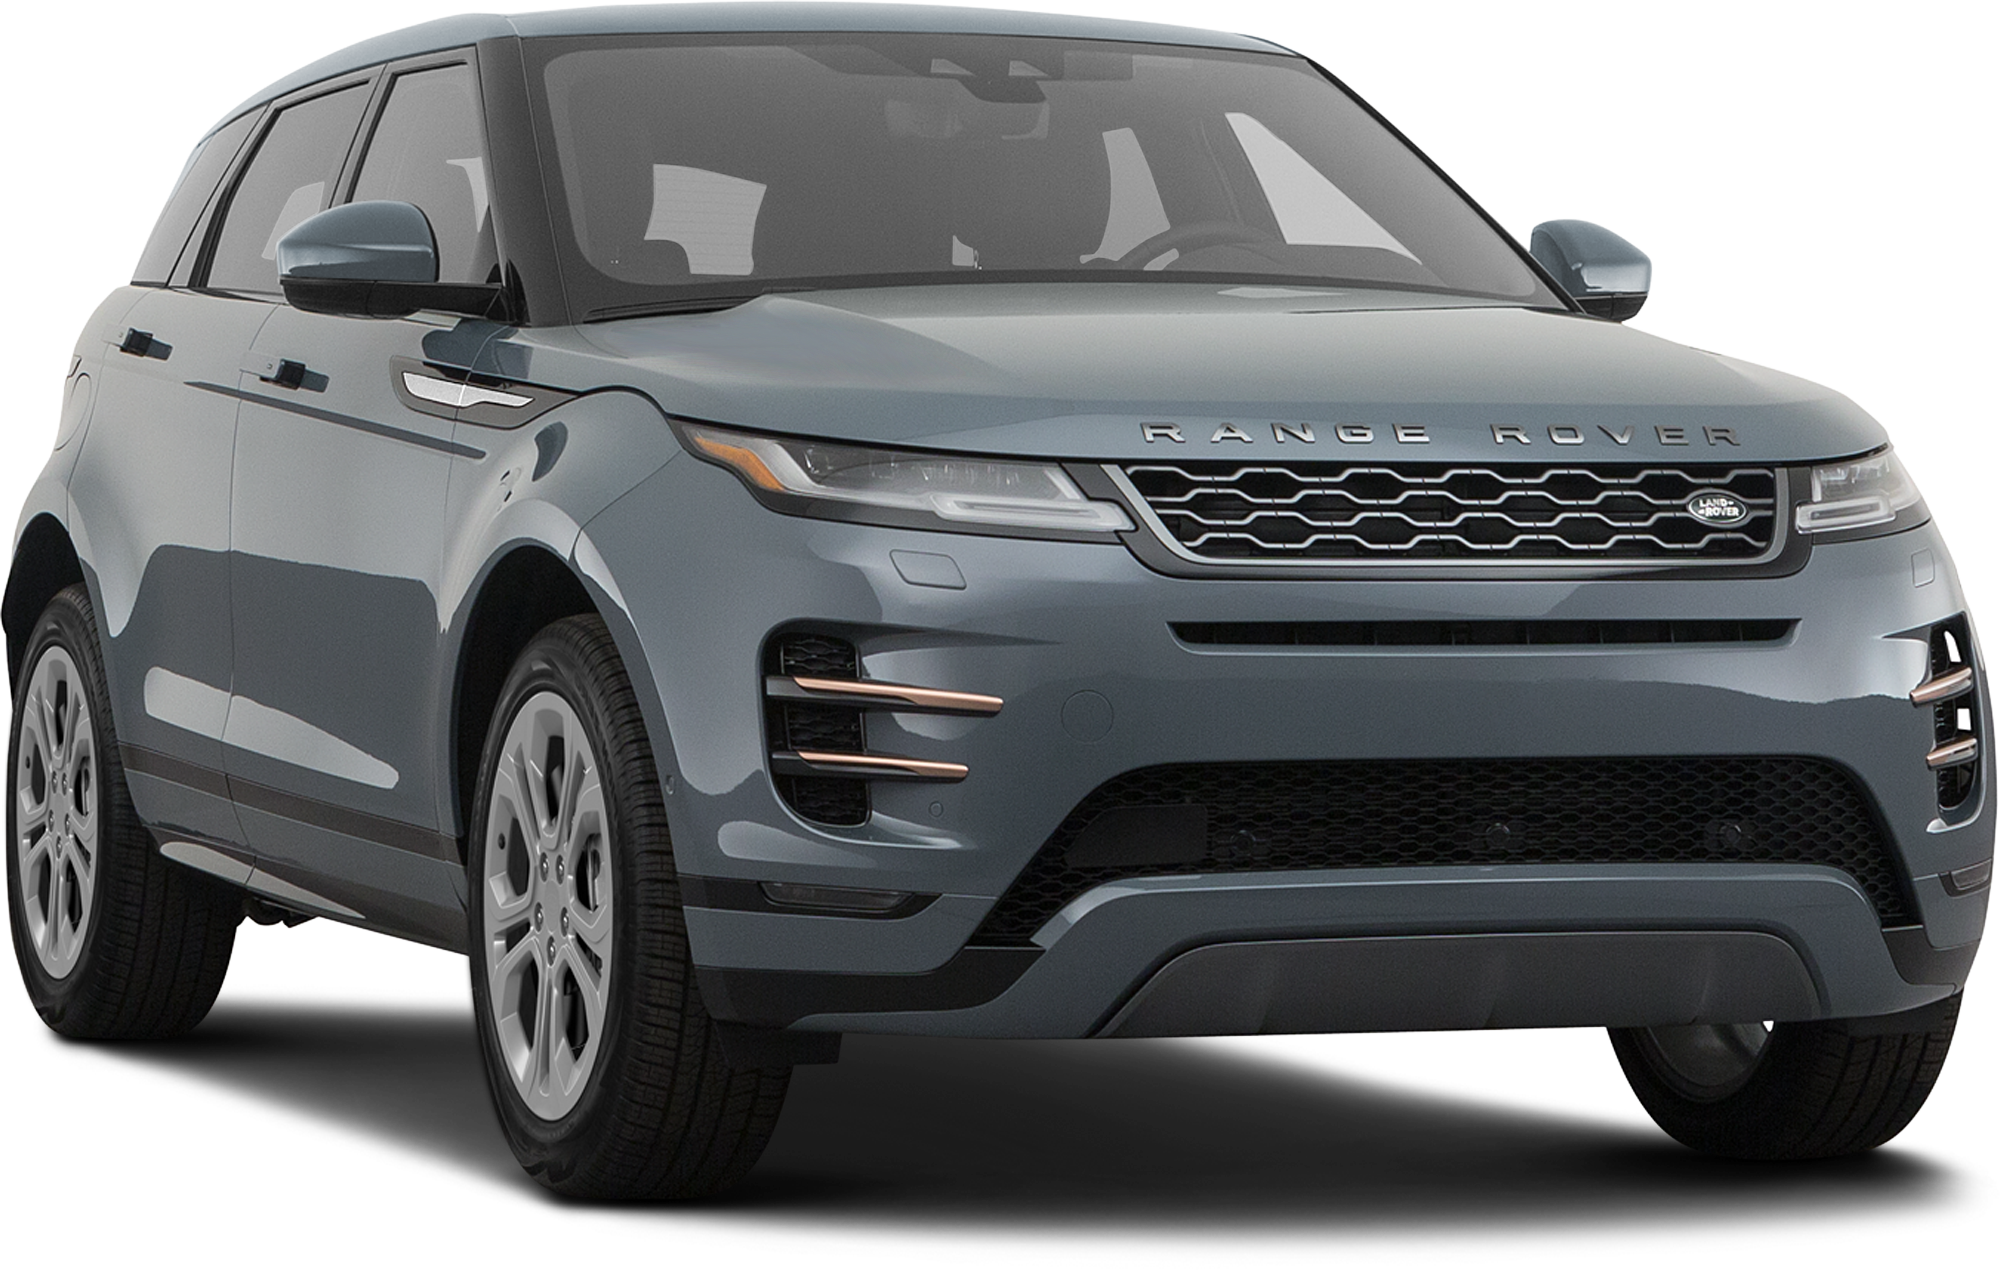 2021 Land Rover Range Rover Evoque Incentives, Specials & Offers in Madison  WI